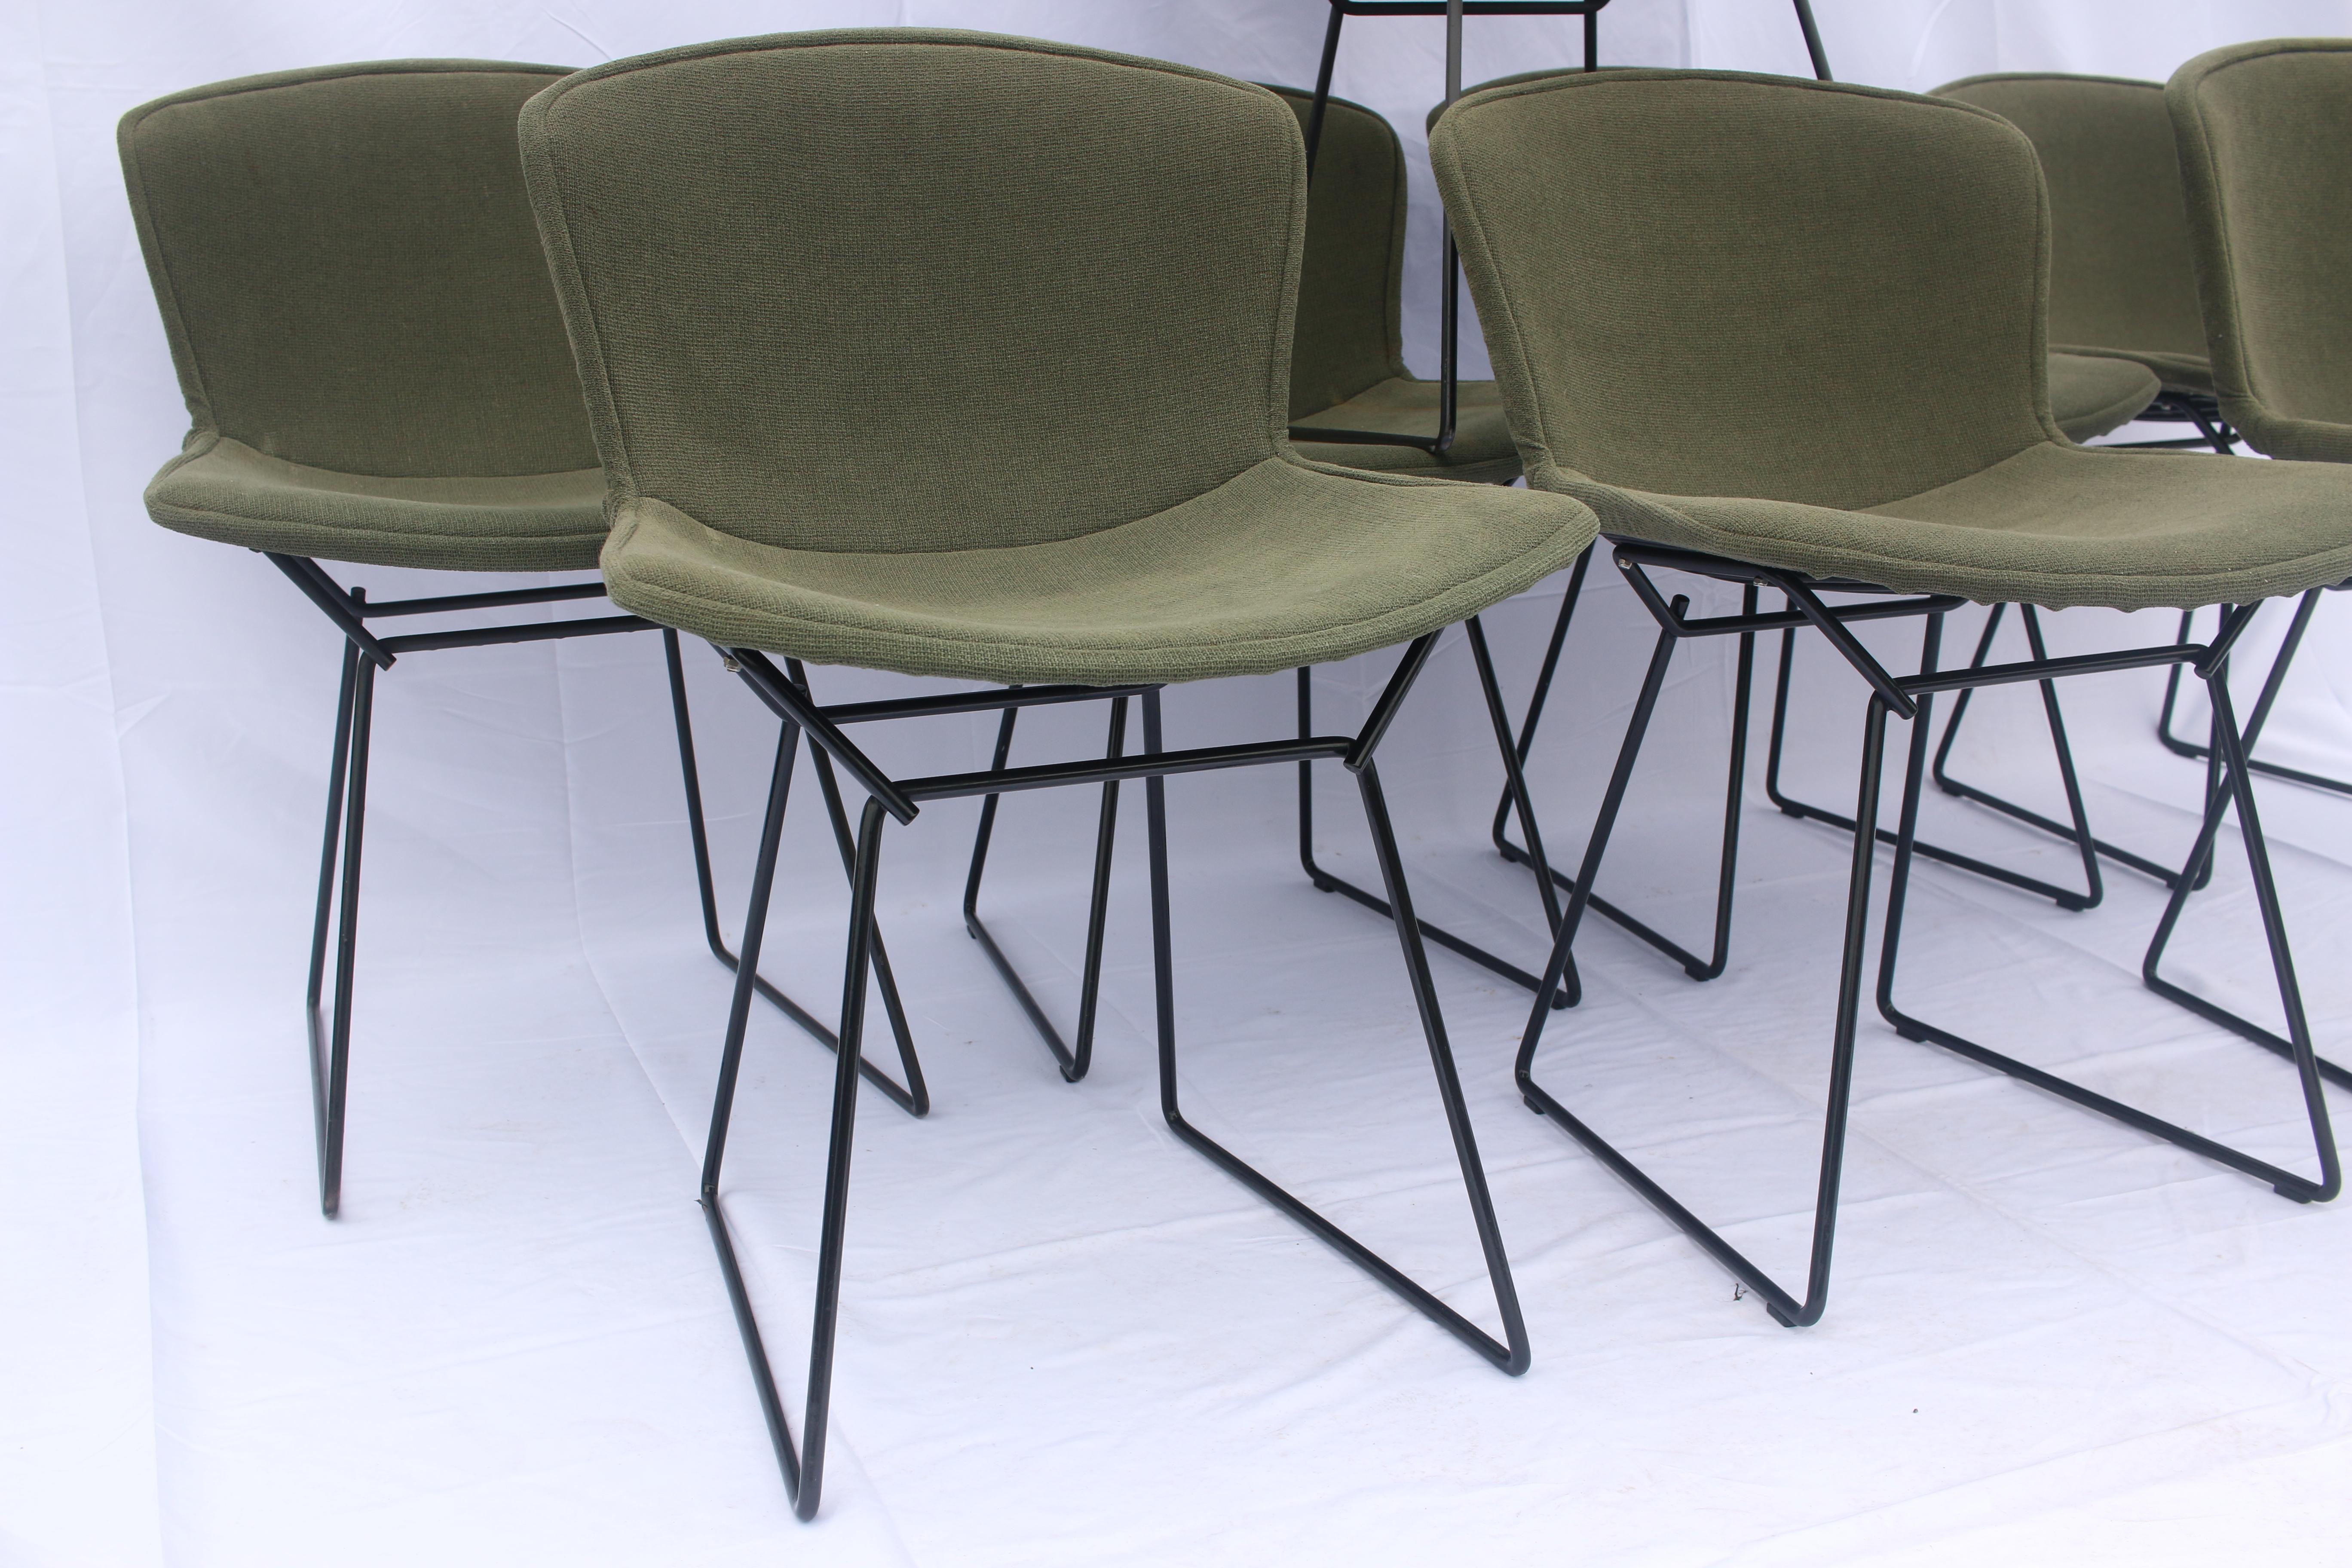 A set of 6 or 8 Harry Bertoia for Knoll black wire chairs with original green seat covers. In good vintage condition - structurally solid, some minor marks to the seat covers and some minor damage to the finish on a the feet of a couple of the